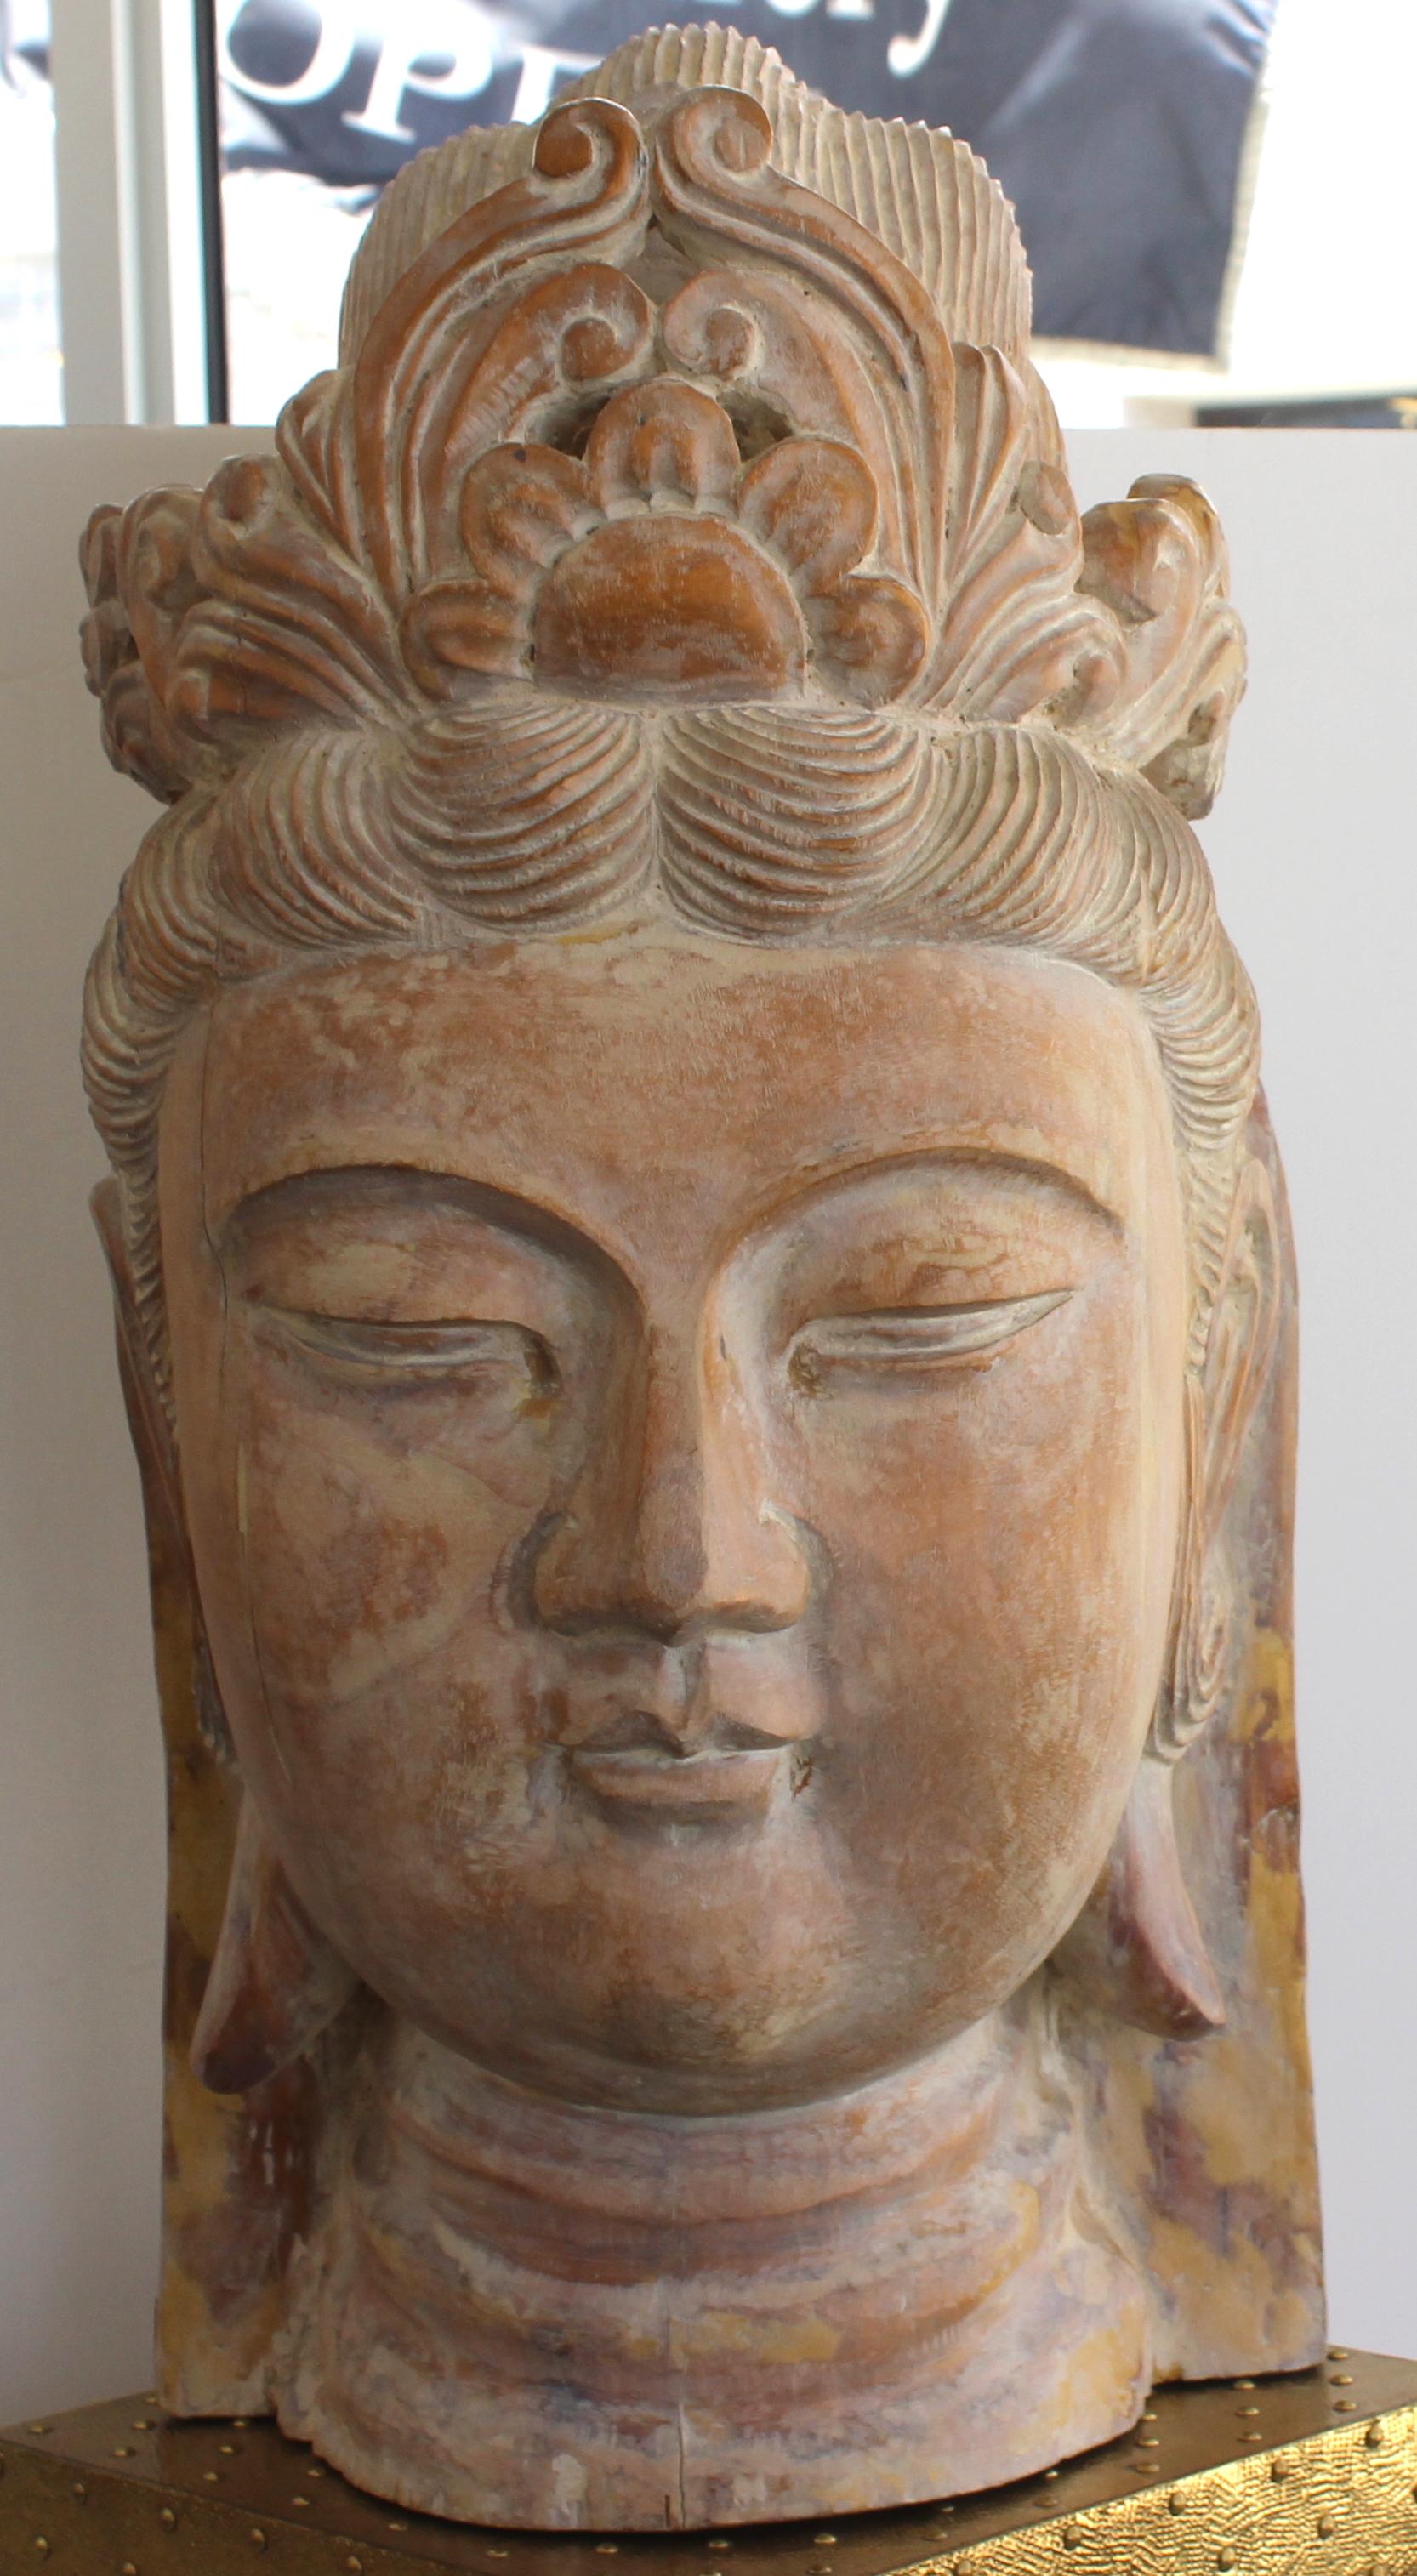 Hand-Carved Artisan Carved Wood Buddha Head For Sale